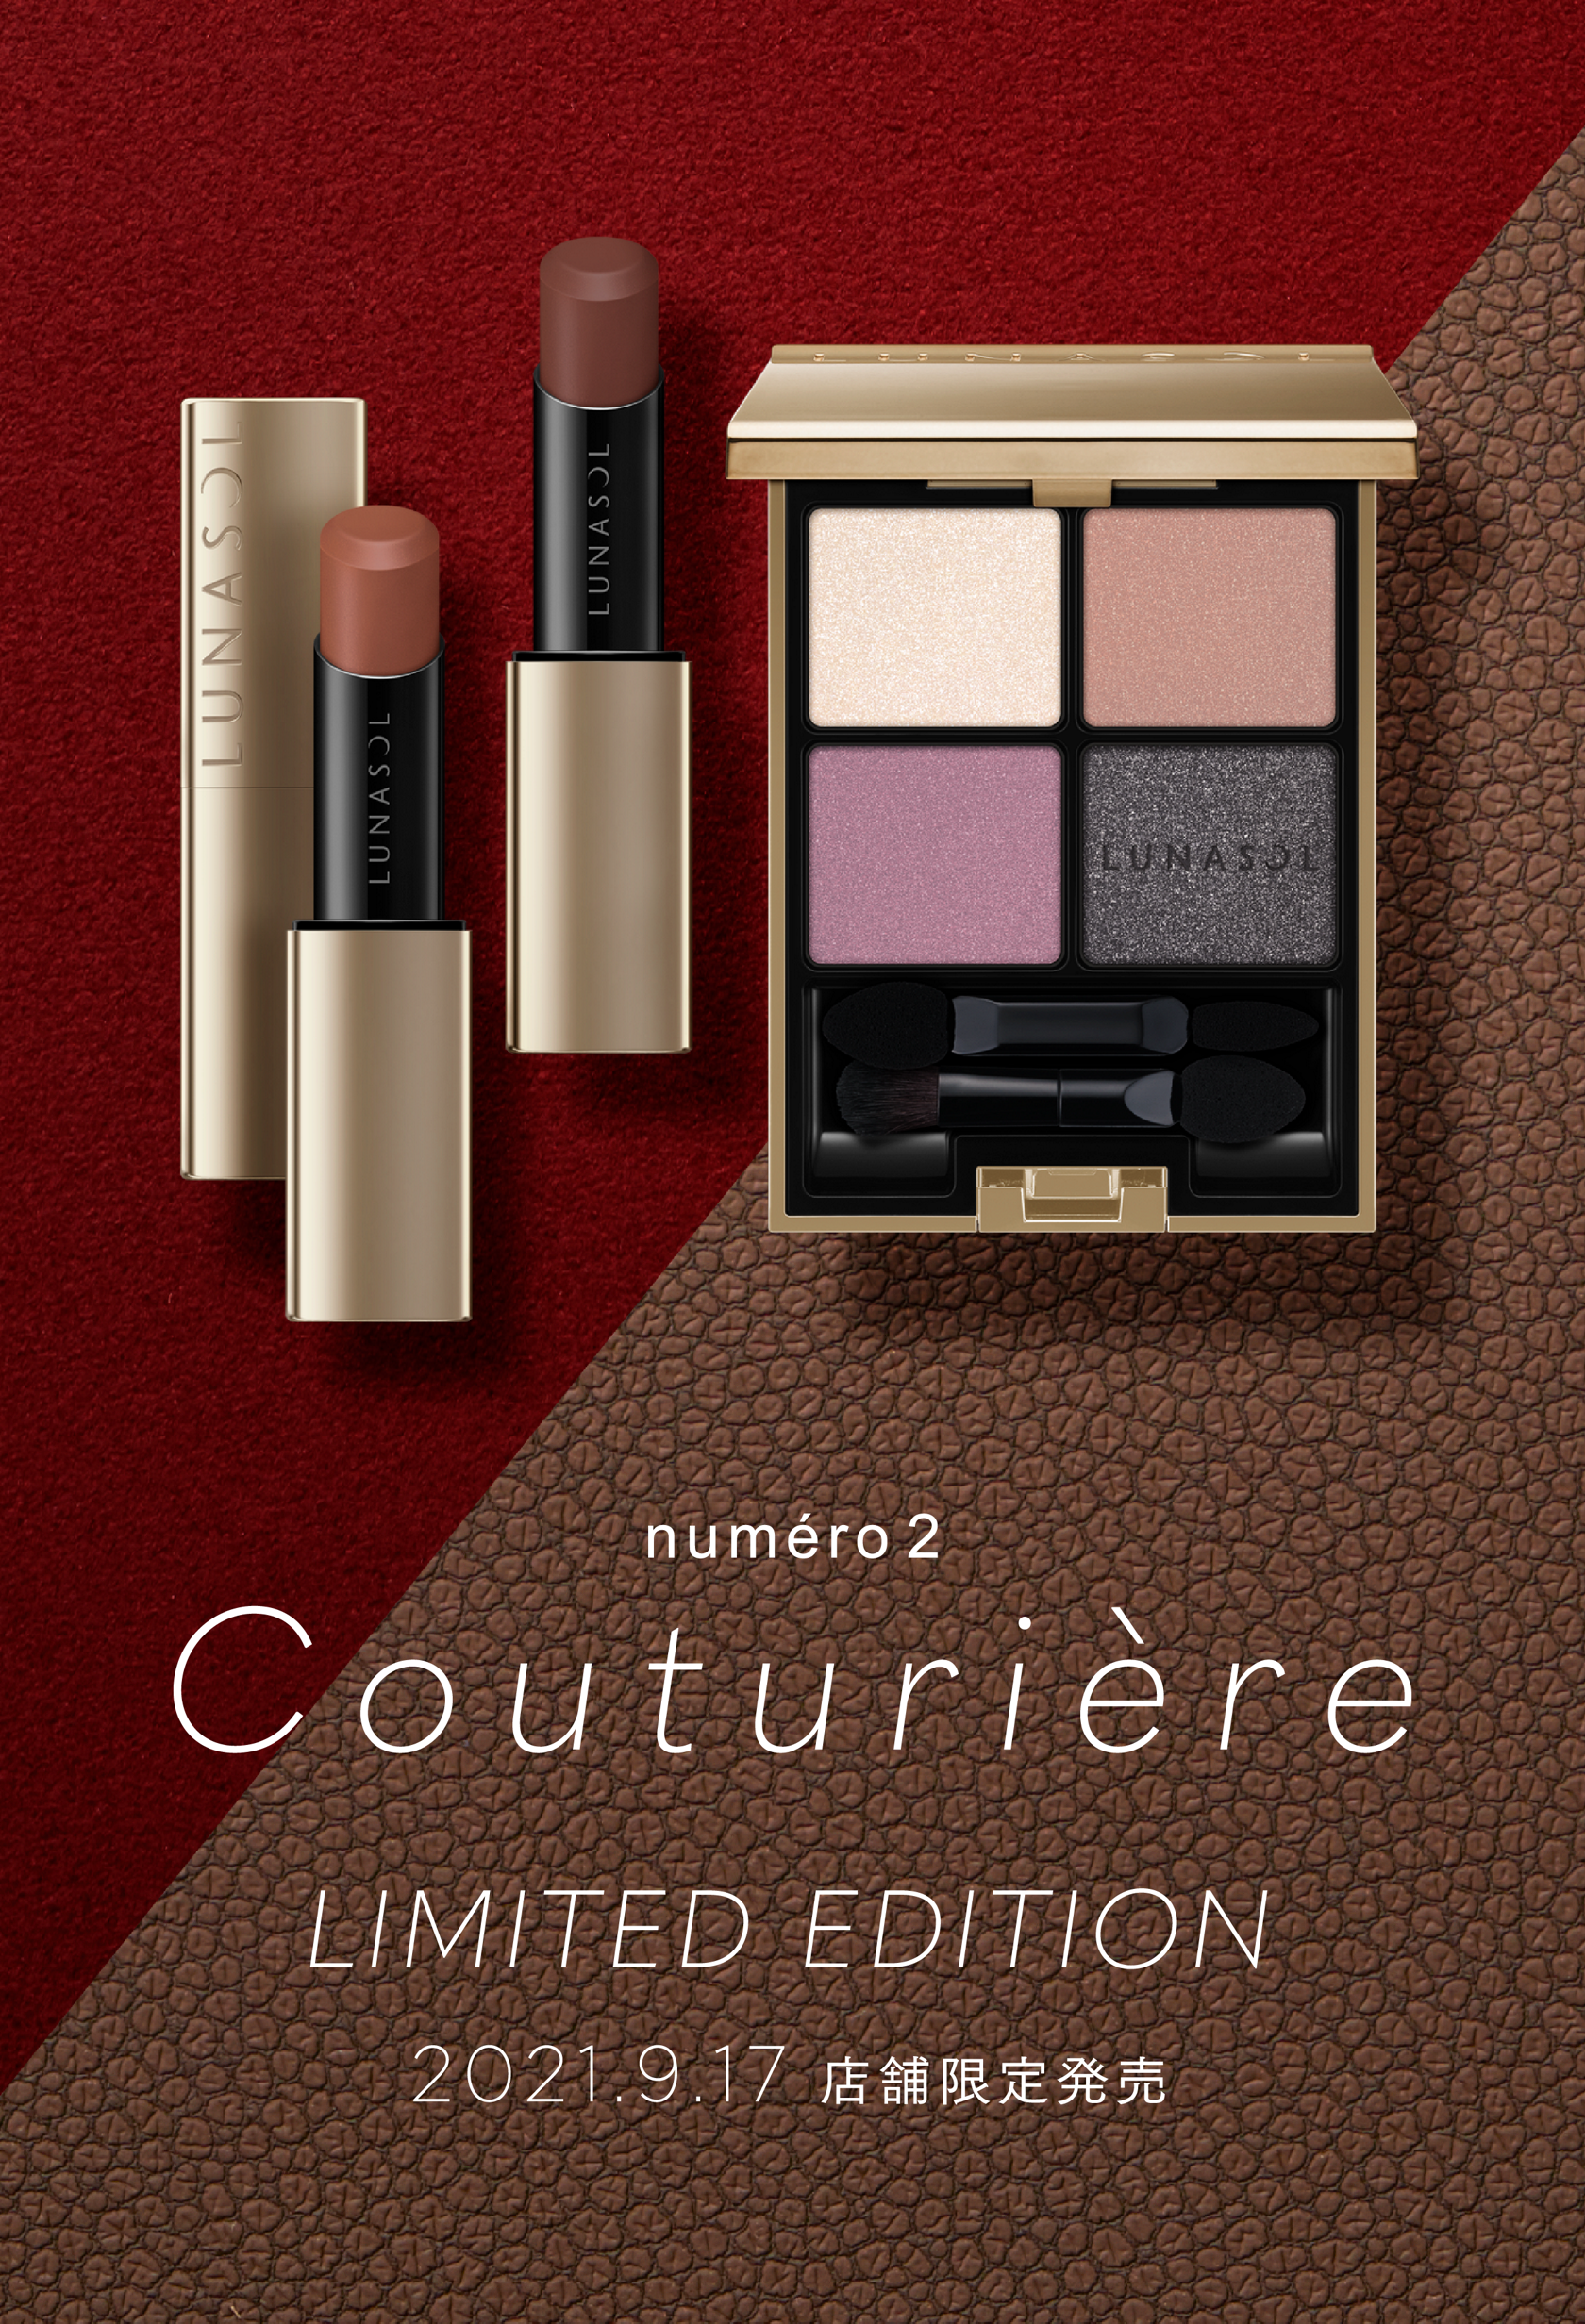 Couturiere Limited Edition ルナソル